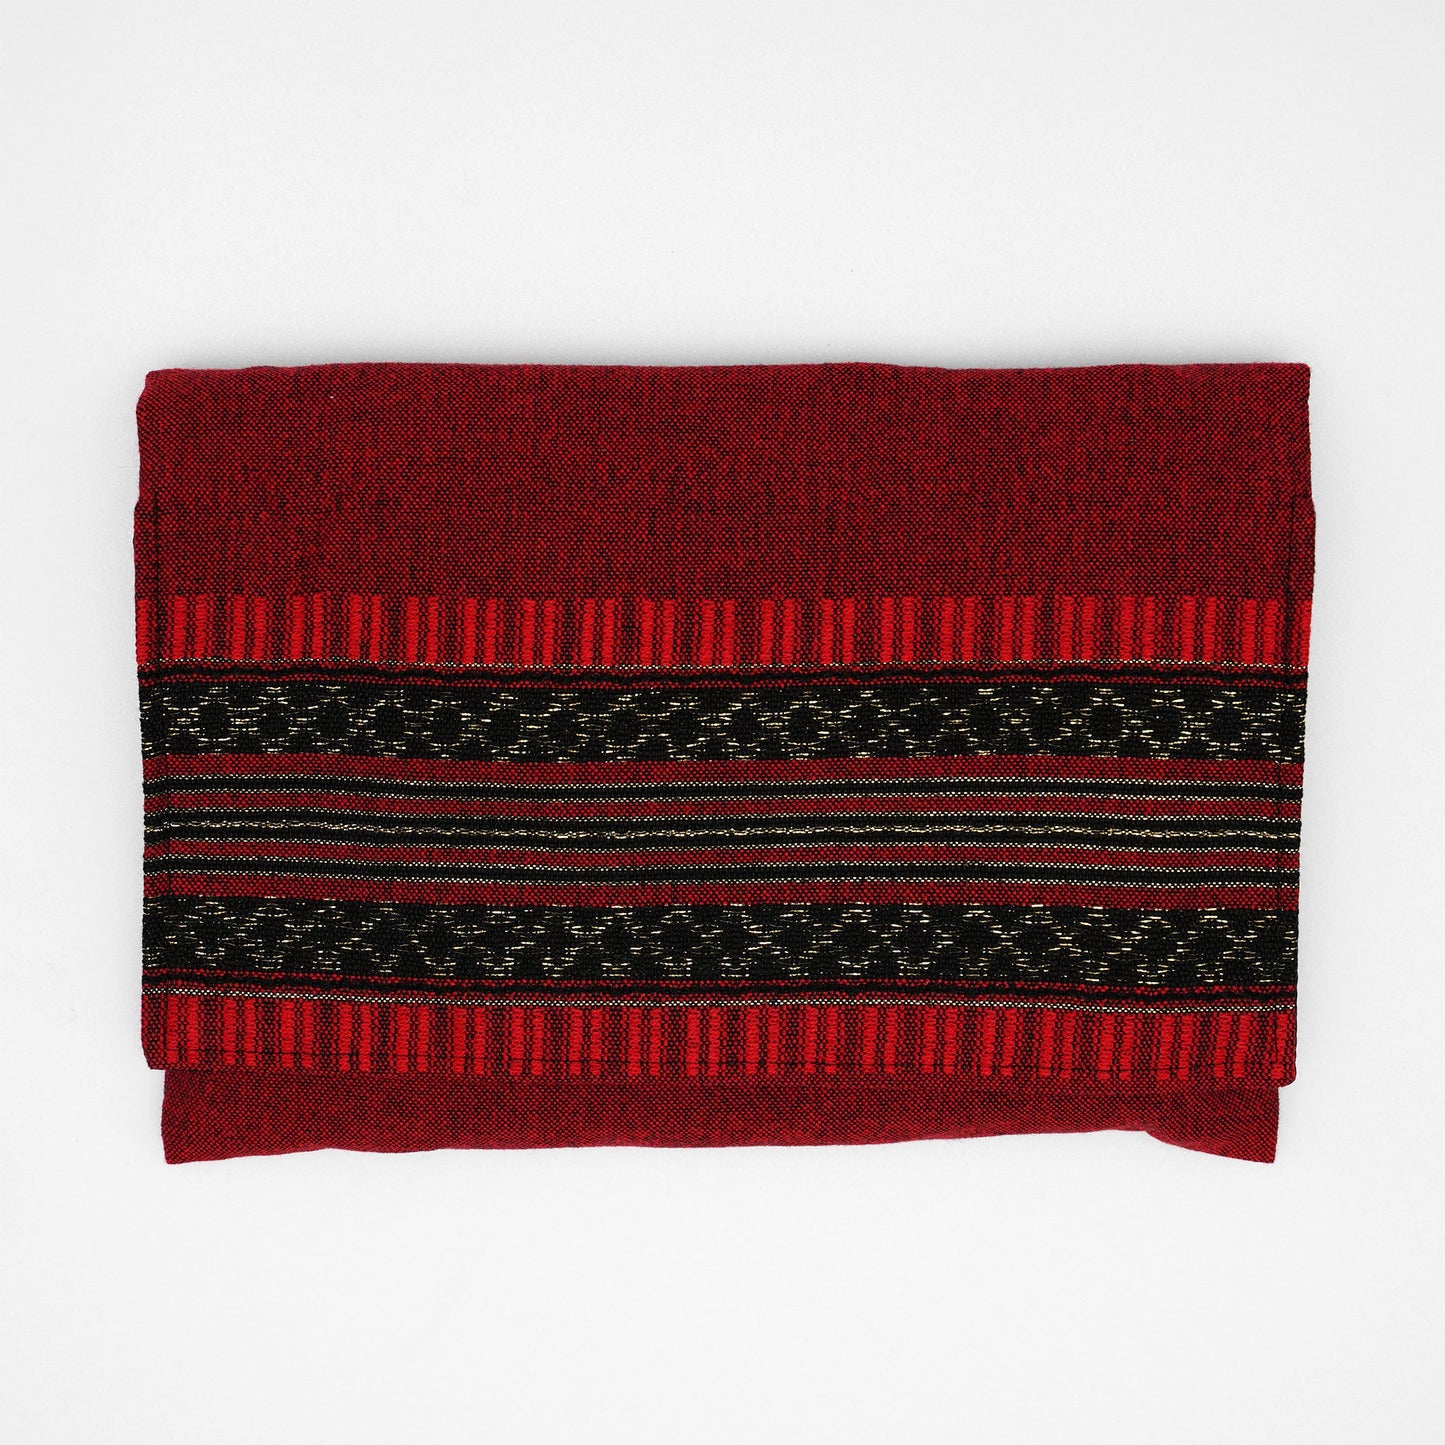 Hagar - Cotton Tallit - Black and gold on Red